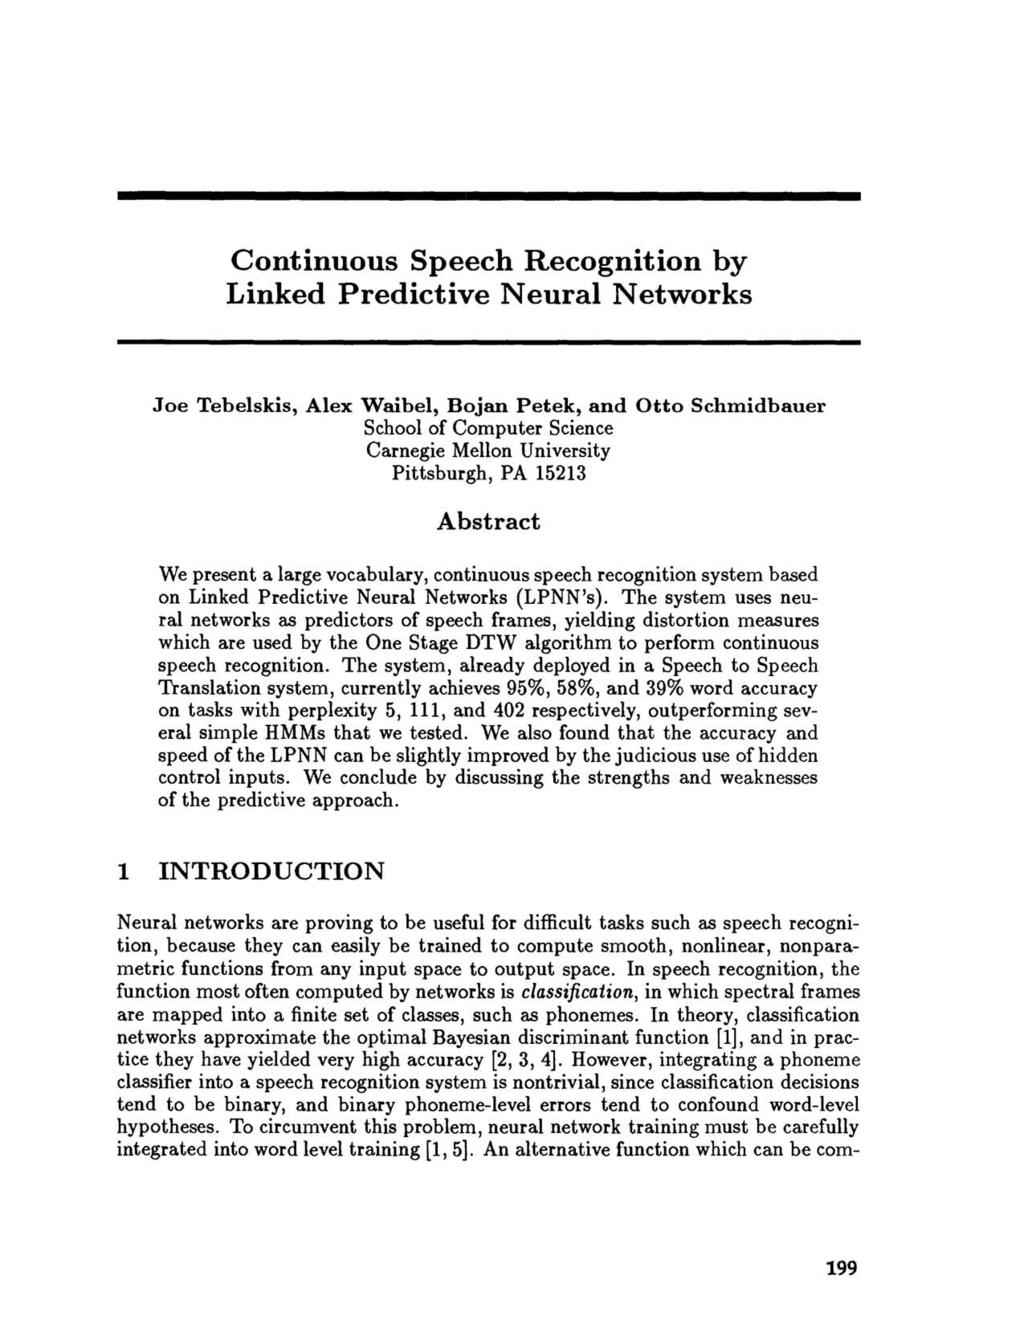 Continuous Speech Recognition by Linked Predictive Neural Networks Joe Tebelskis, Alex Waibel, Bojan Petek, and Otto Schmidbauer School of Computer Science Carnegie Mellon University Pittsburgh, PA